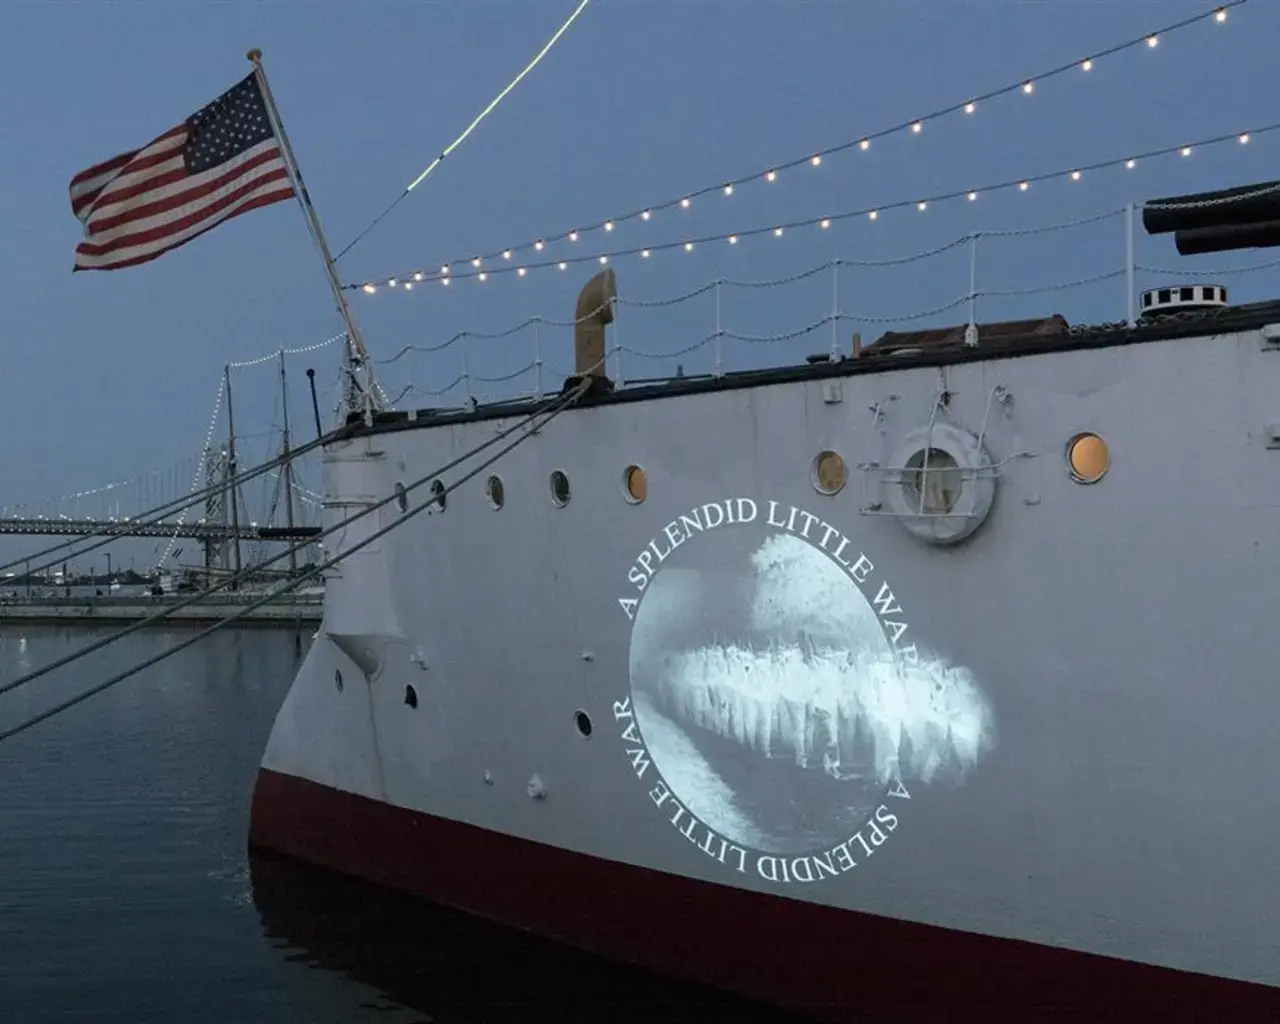 Nadia Hironaka &amp; Matthew Suib, Splendid Little War, a video projection with soundtrack for 2016 ArtShip Olympia exhibition, presented by Independence Seaport Museum and Philadelphia Sculptors. Photo courtesy of the artists.